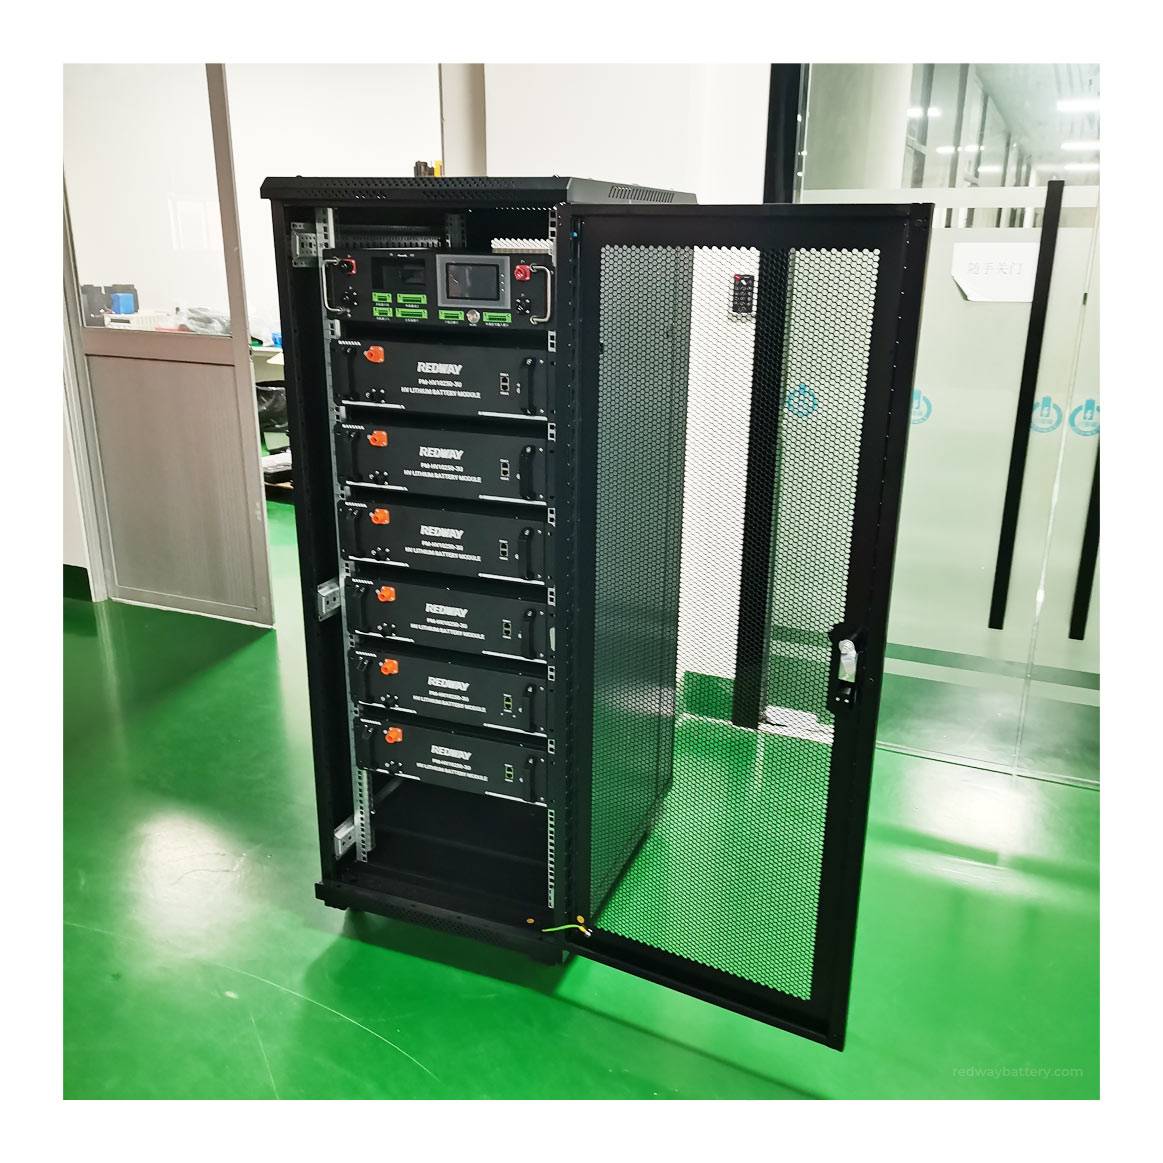  100V 50Ah High Voltage Lithium Battery Module and Rack System (with BCU) / PM-HV10250-3U